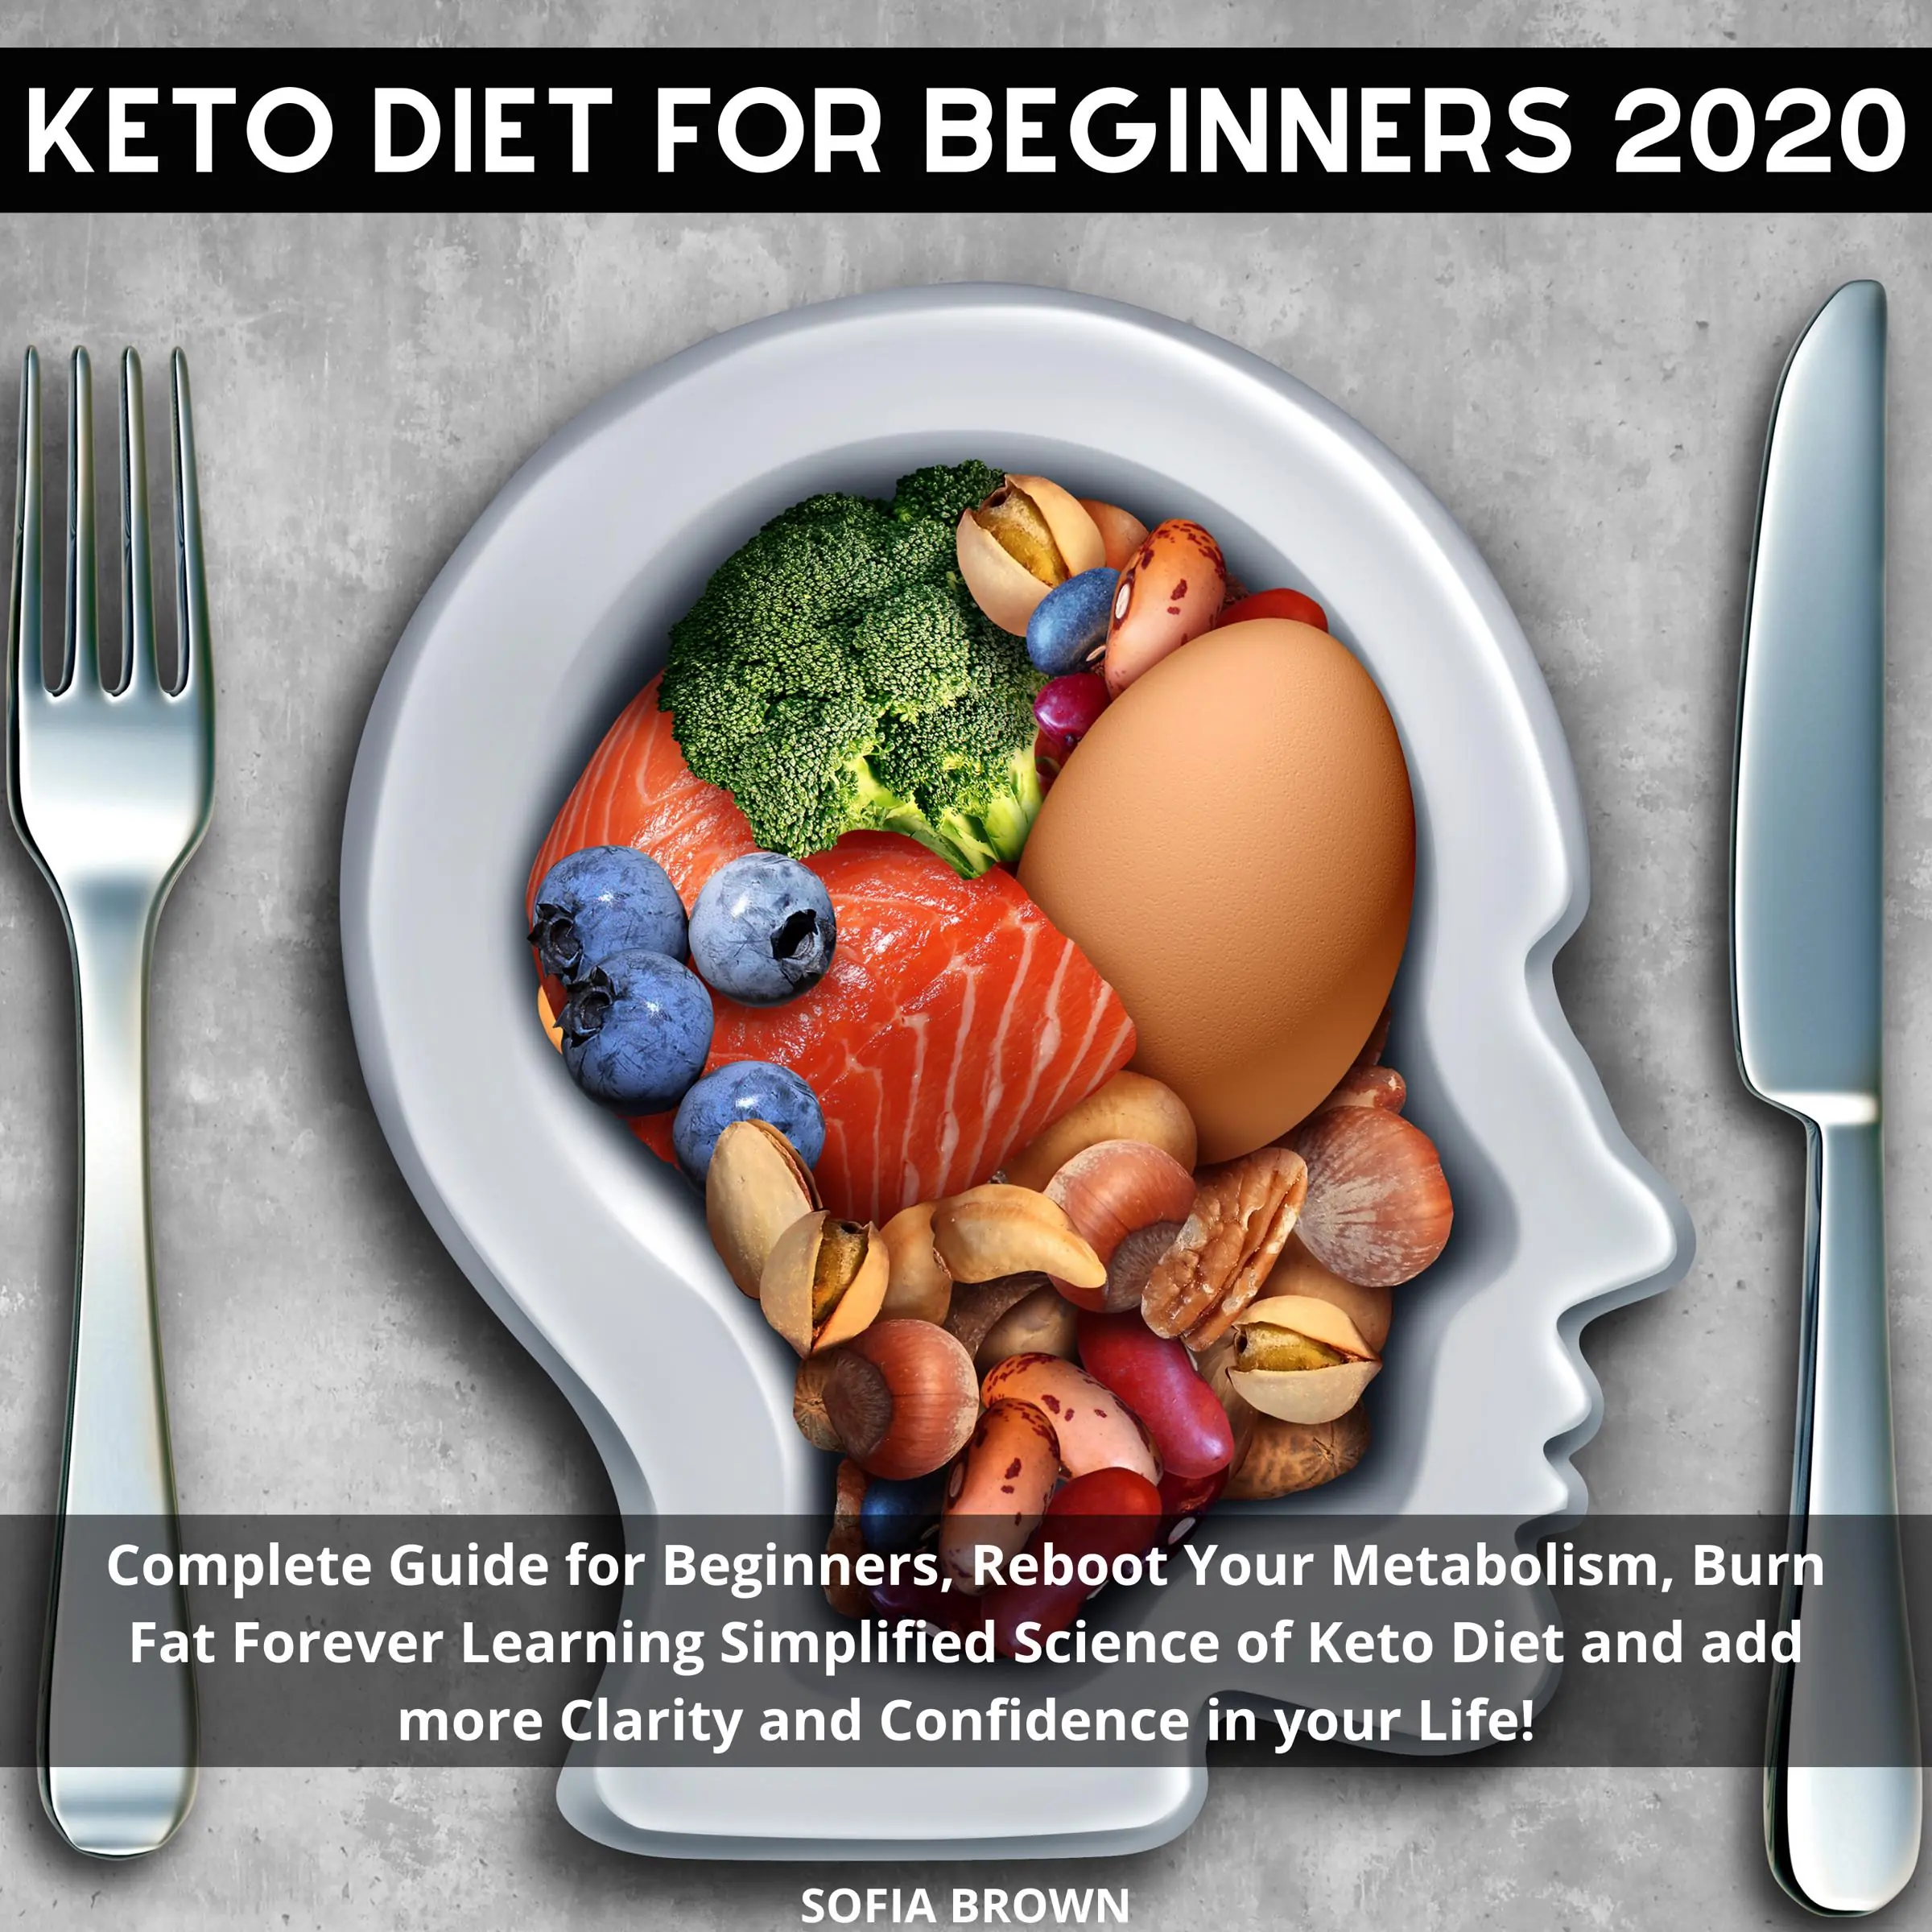 Keto Diet for Beginners 2020 Audiobook by Sofia Brown